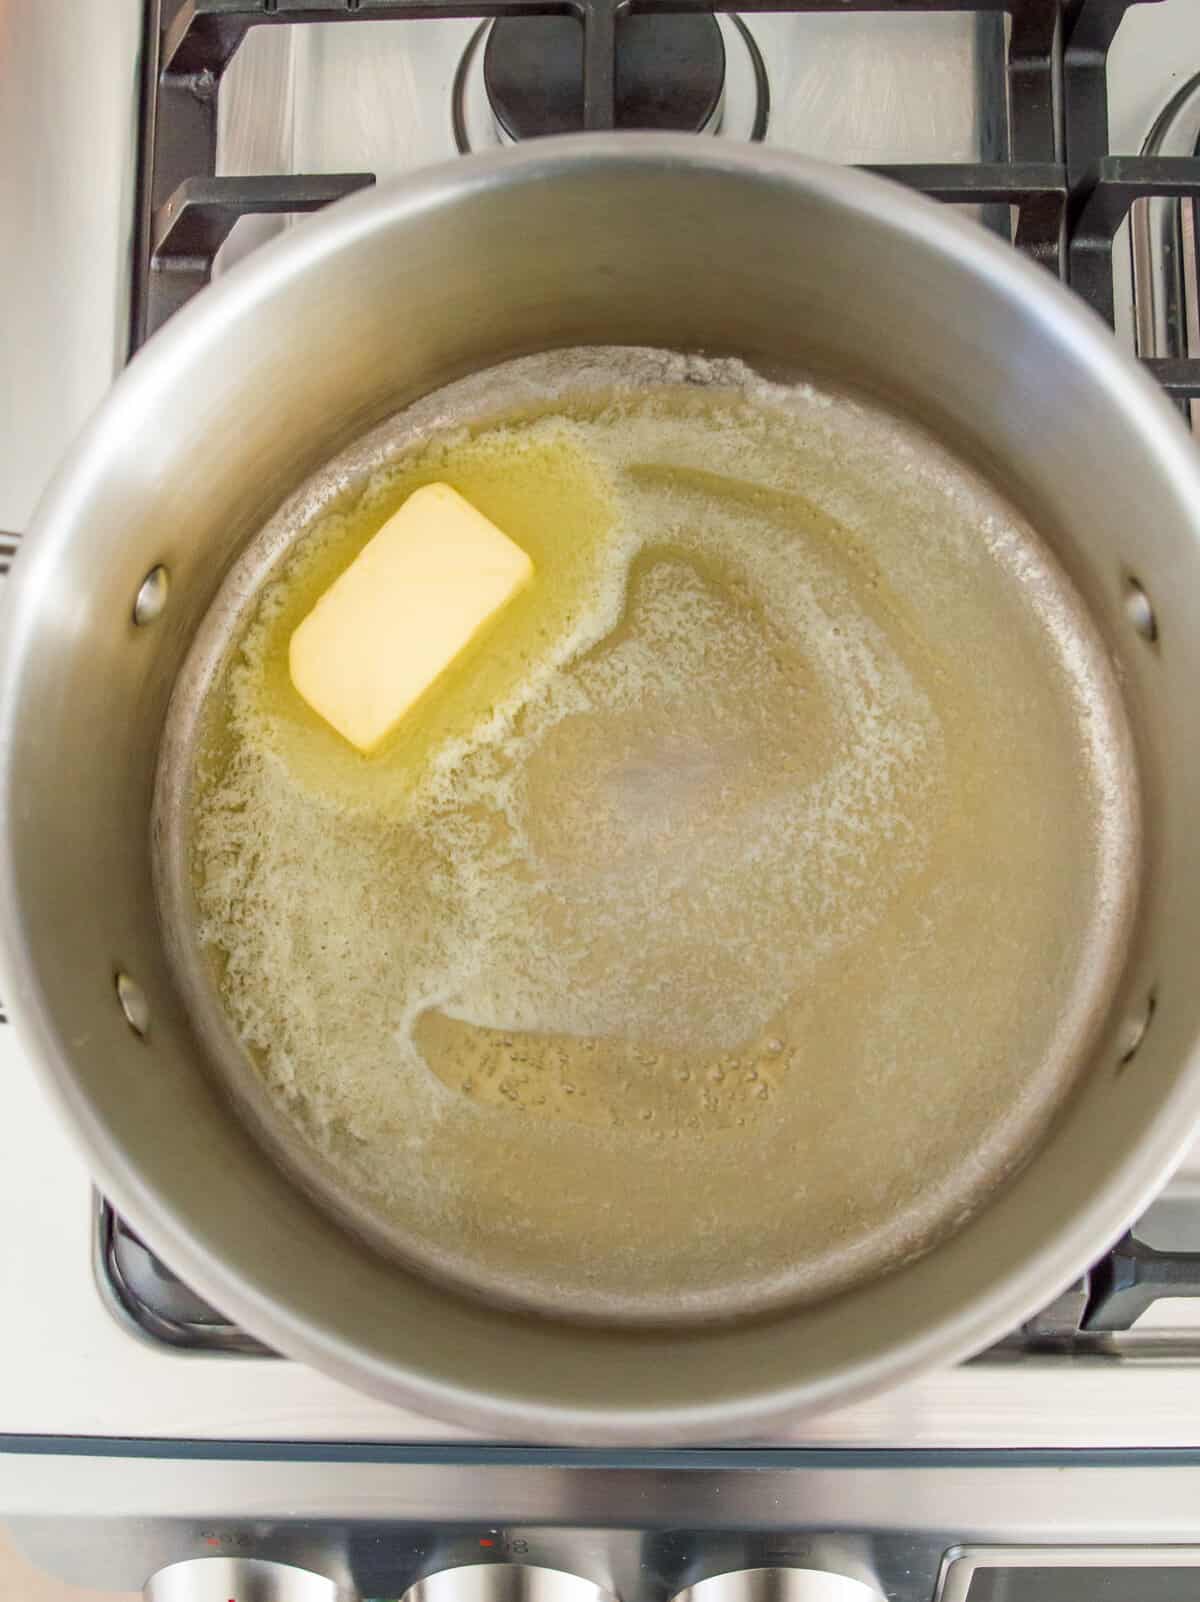 Butter melting in a pot on the stovetop.